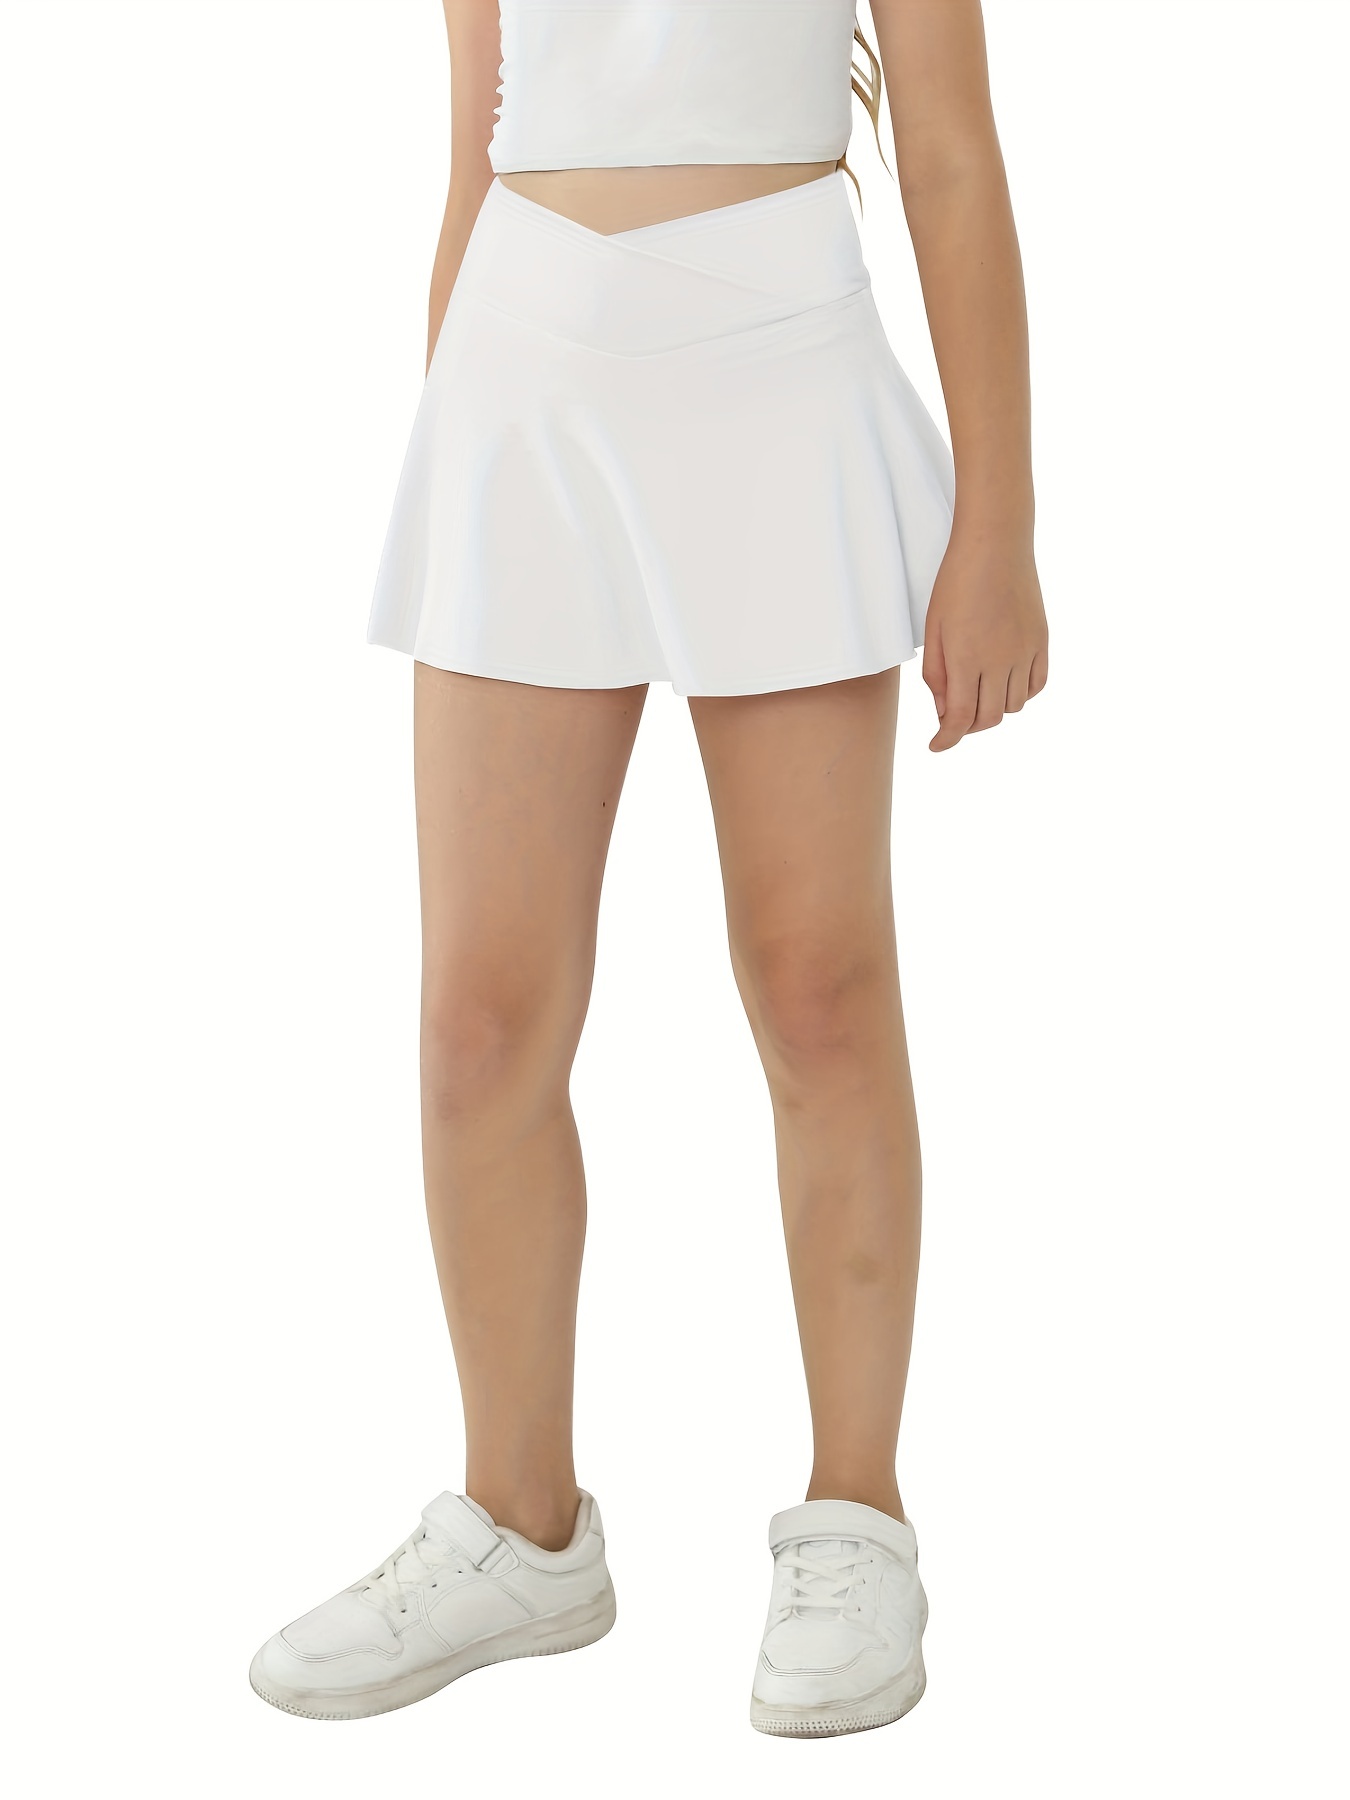 IUGA Pleated Tennis Skirt for Women Athletic Golf Skorts with